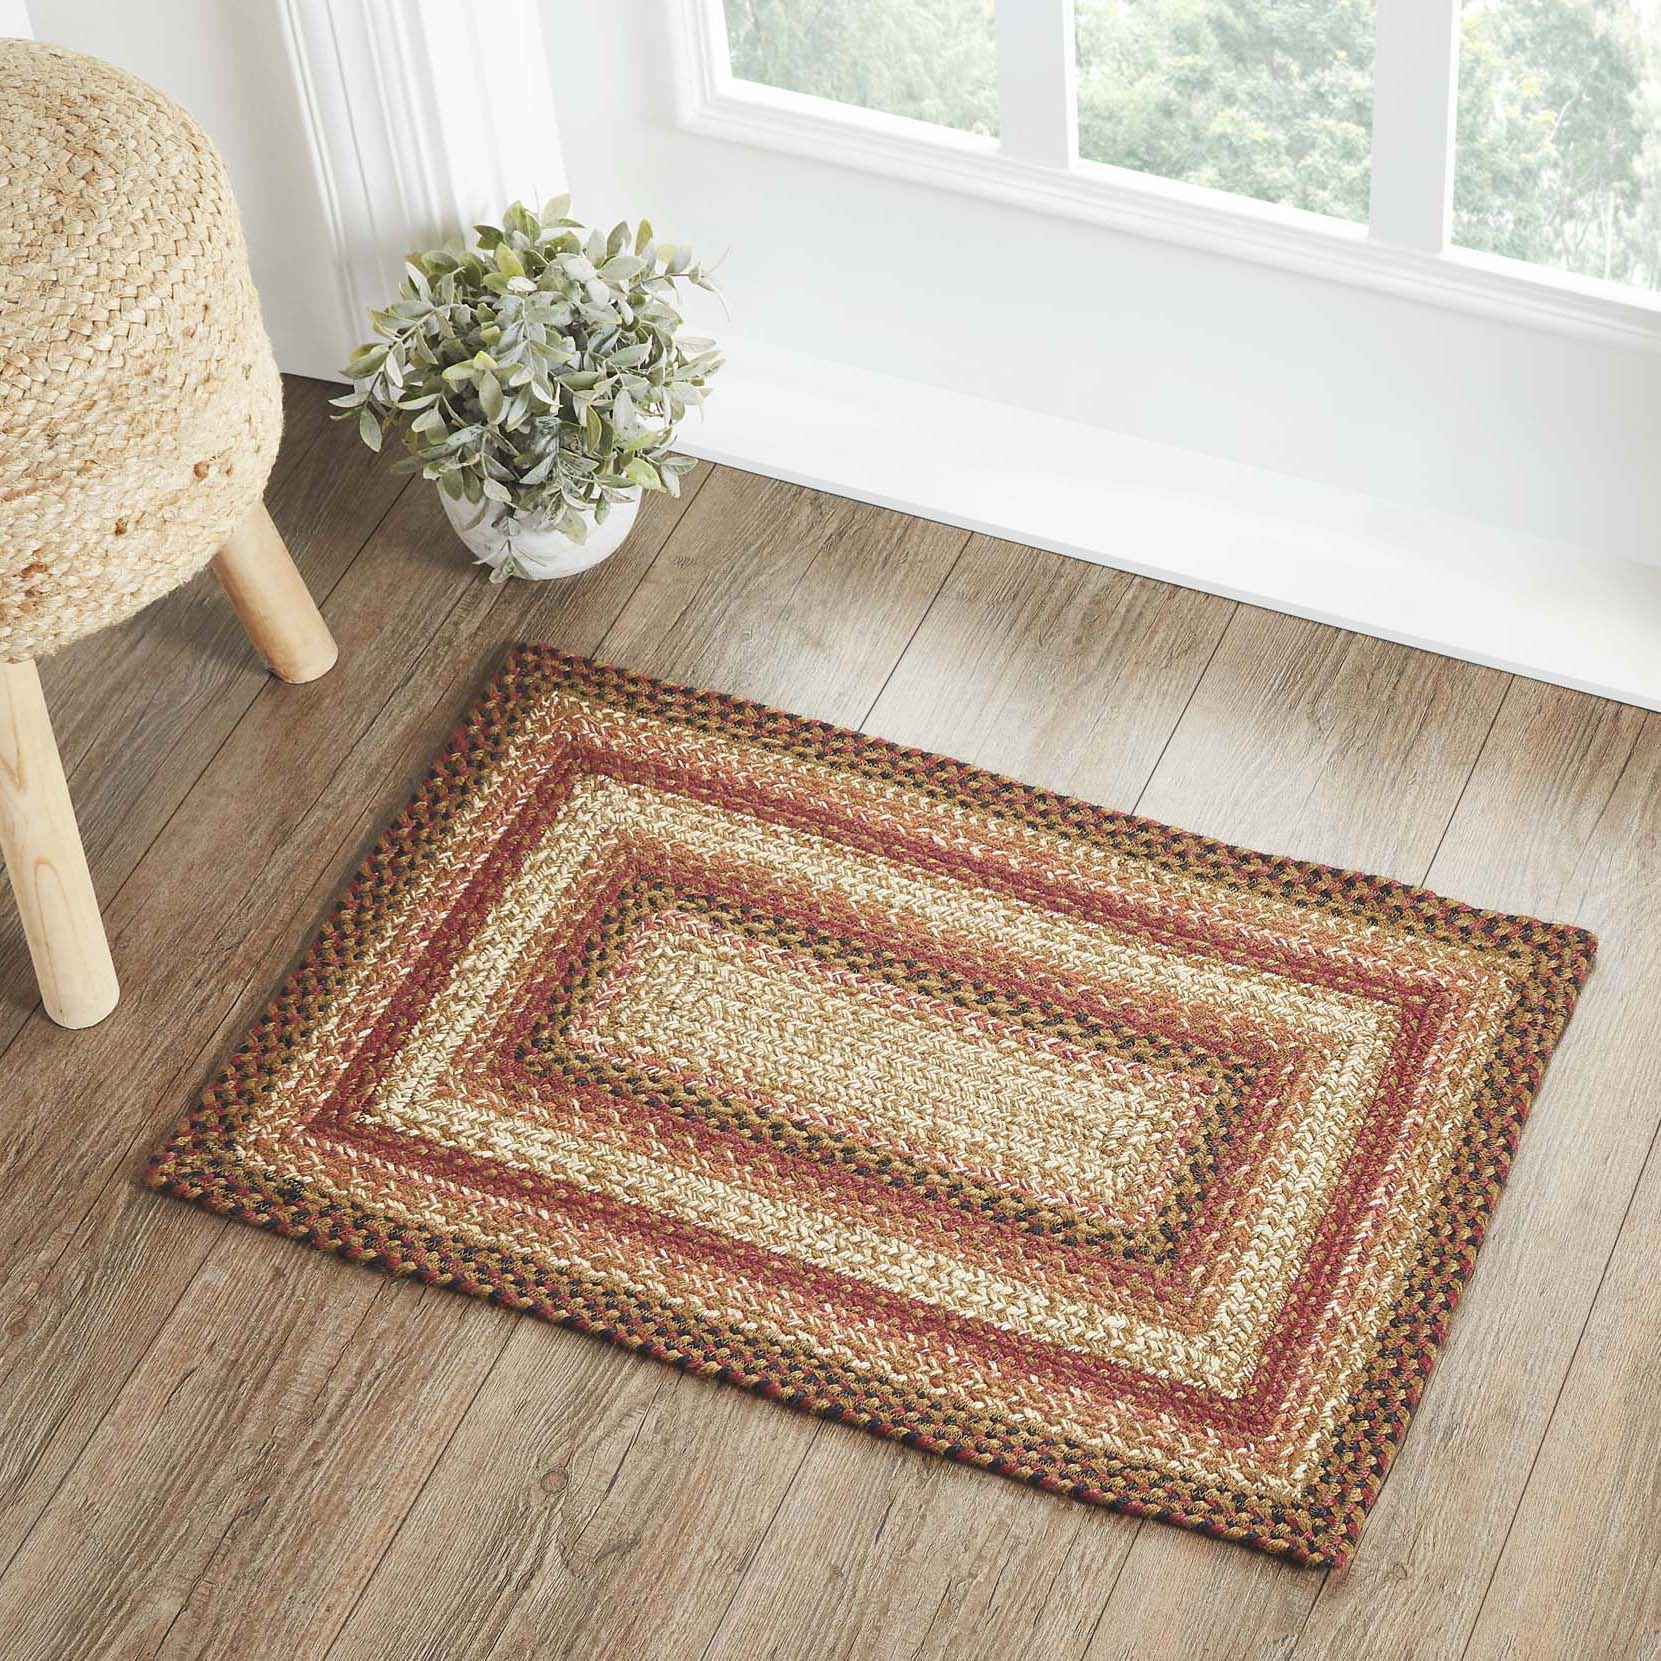 67117-Ginger-Spice-Jute-Rug-Rect-w-Pad-20x30-image-1